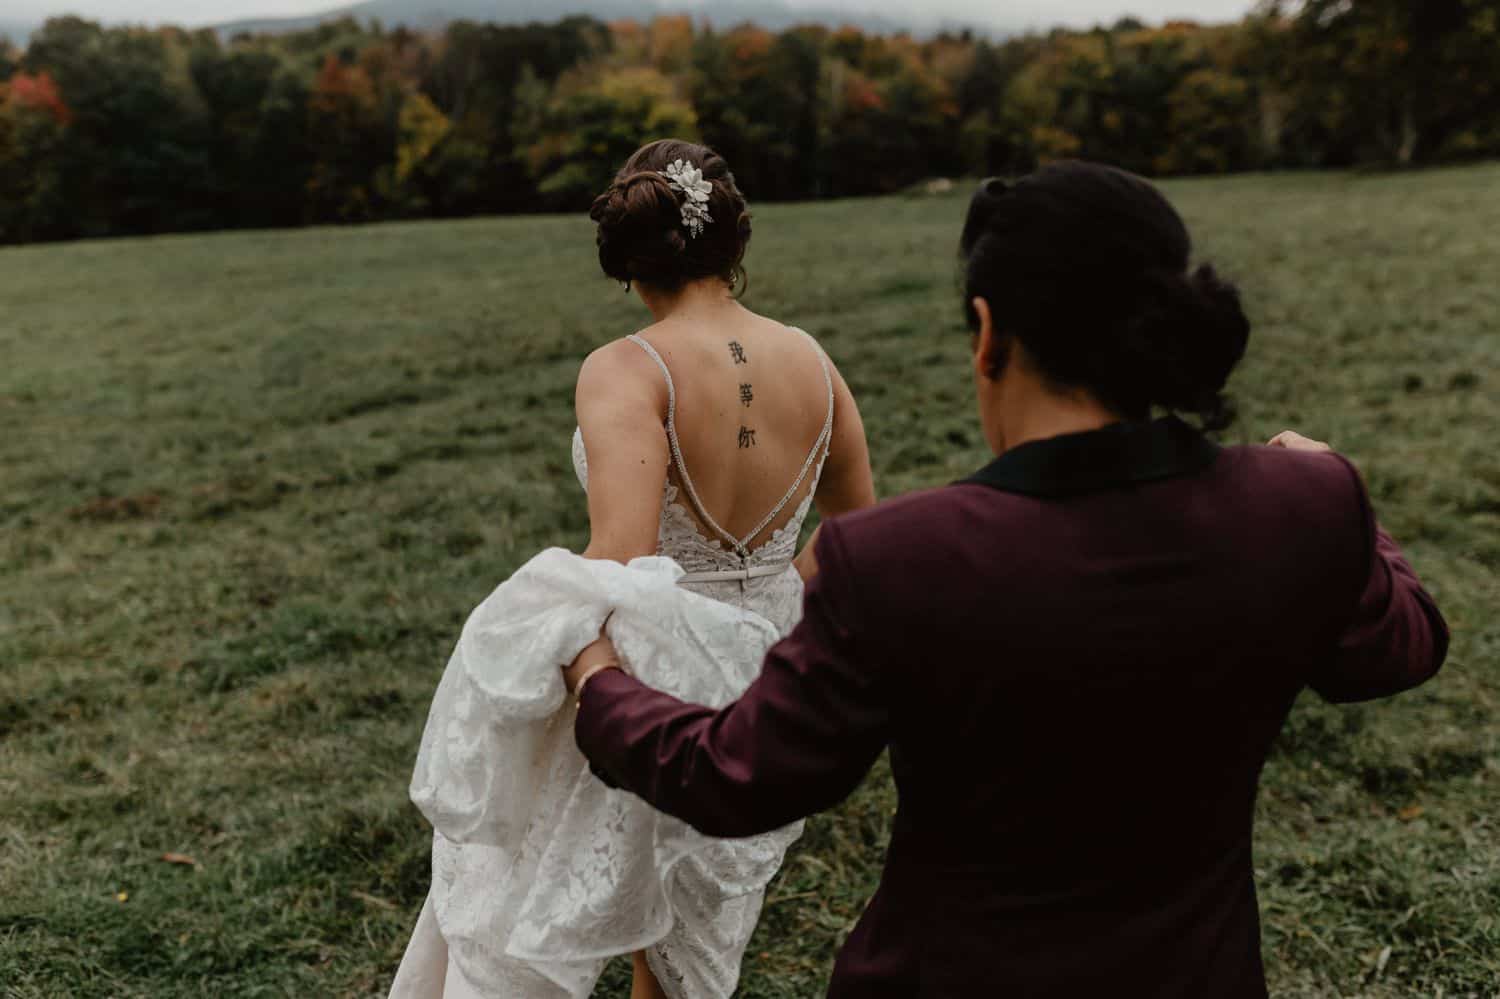 A bride with a back tattoo walks through a field as her wife holds her train.